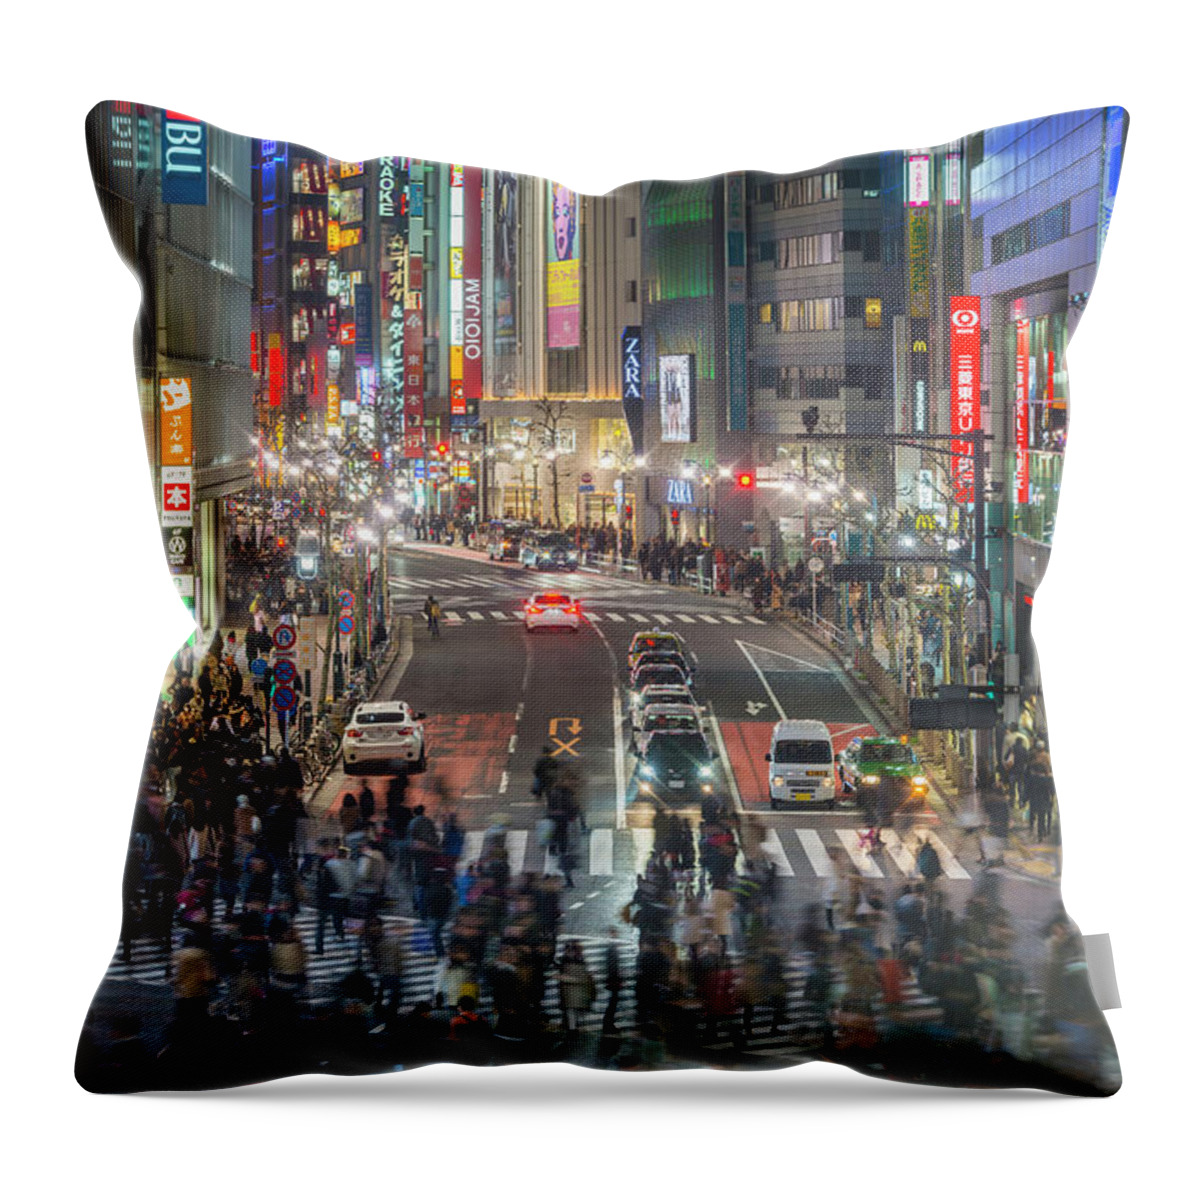 Crowd Throw Pillow featuring the photograph Tokyo Shibuya Crossing Crowds Of People by Fotovoyager